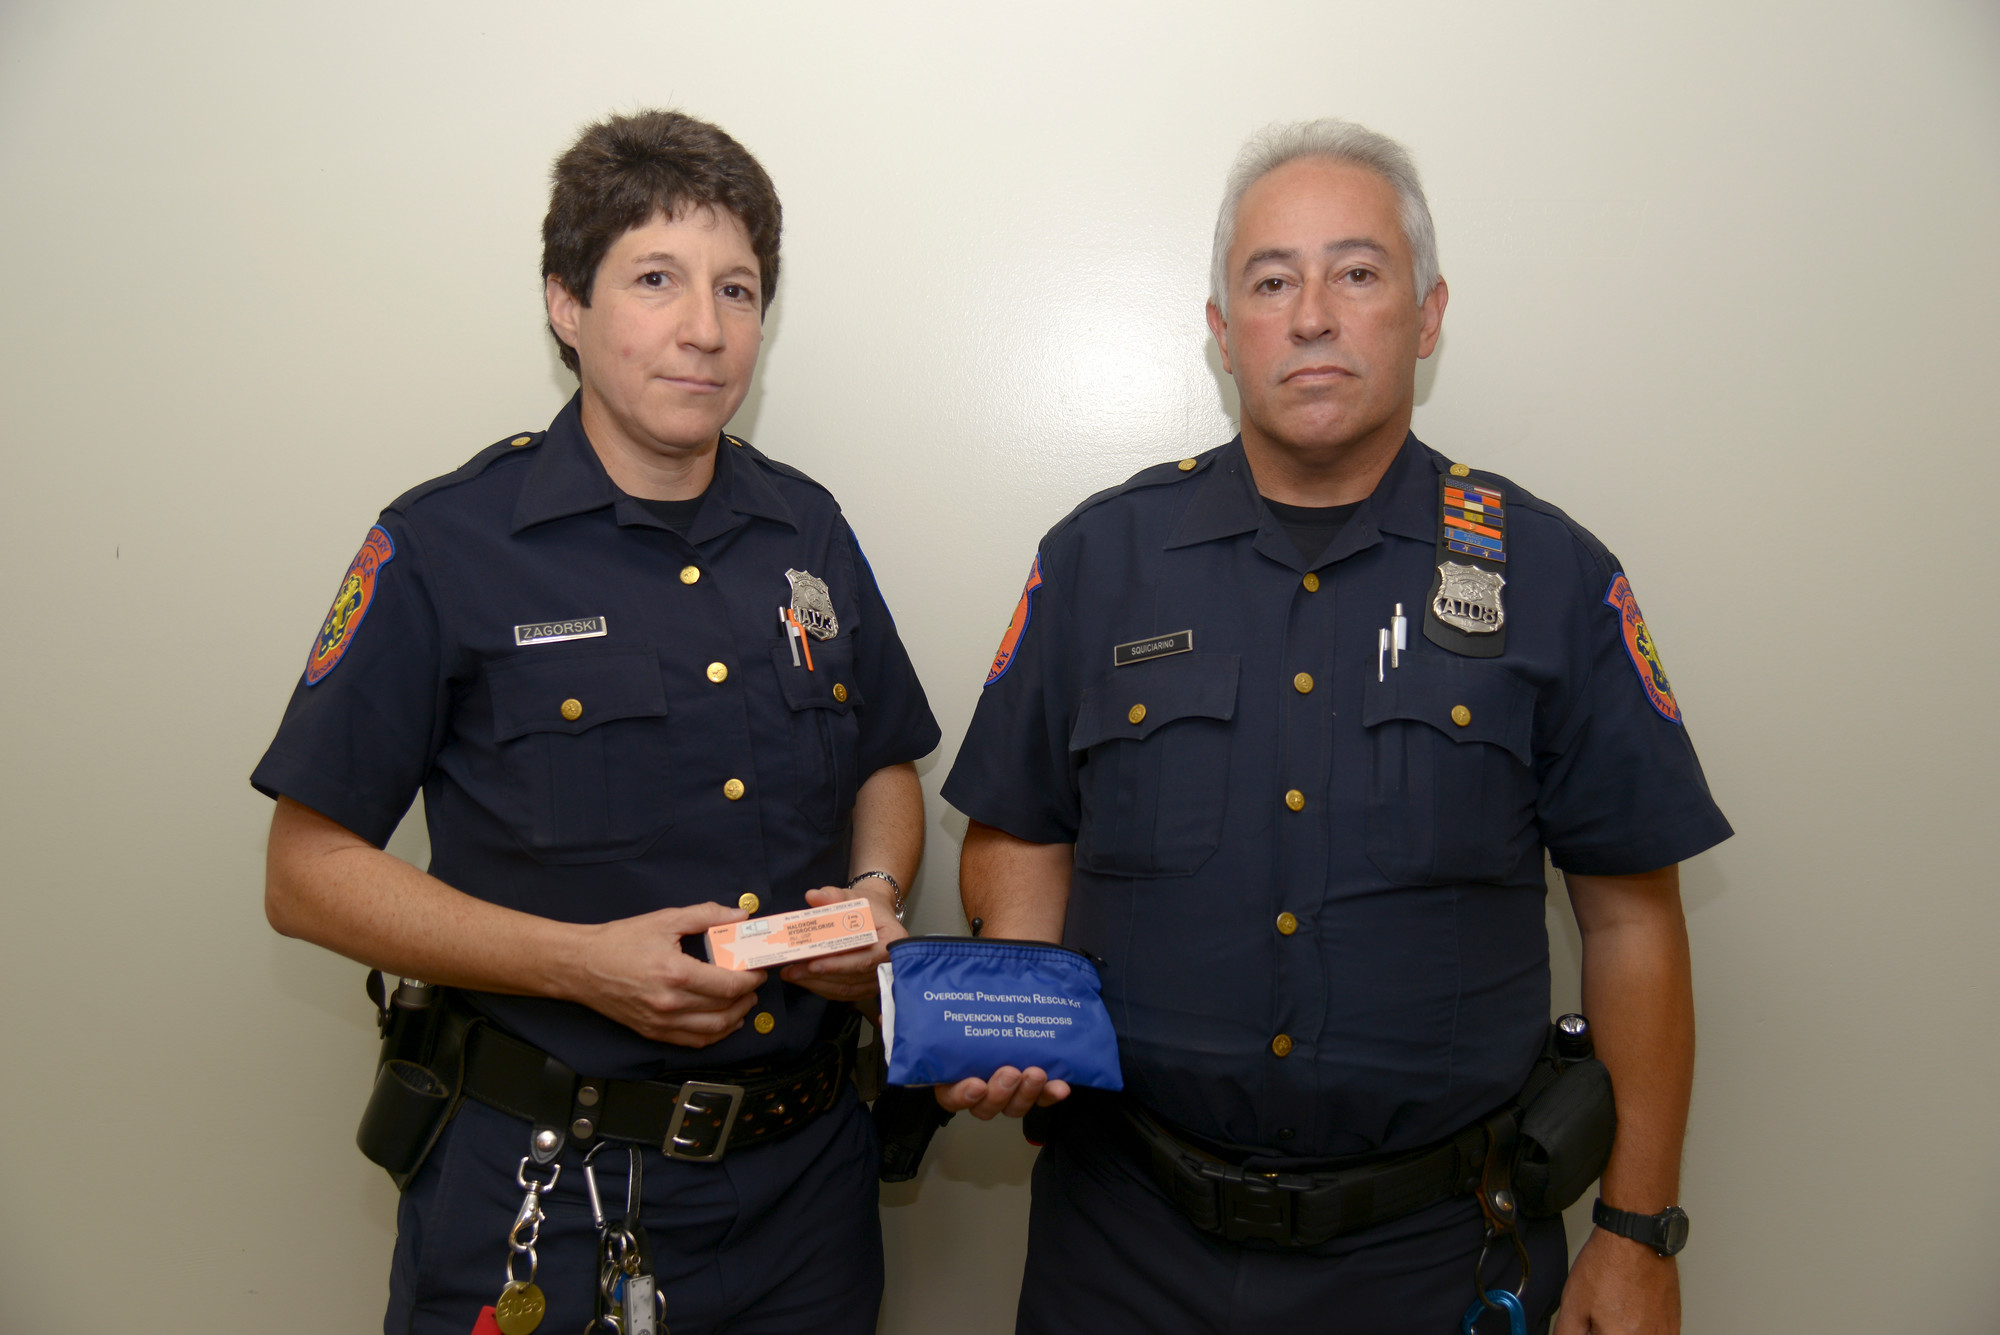 Nassau County Auxiliary Police Officer Shari Zagorski and Pfc. Anthony Squiciarino showed the narcan they carry at all times to save lives from heroin overdose.